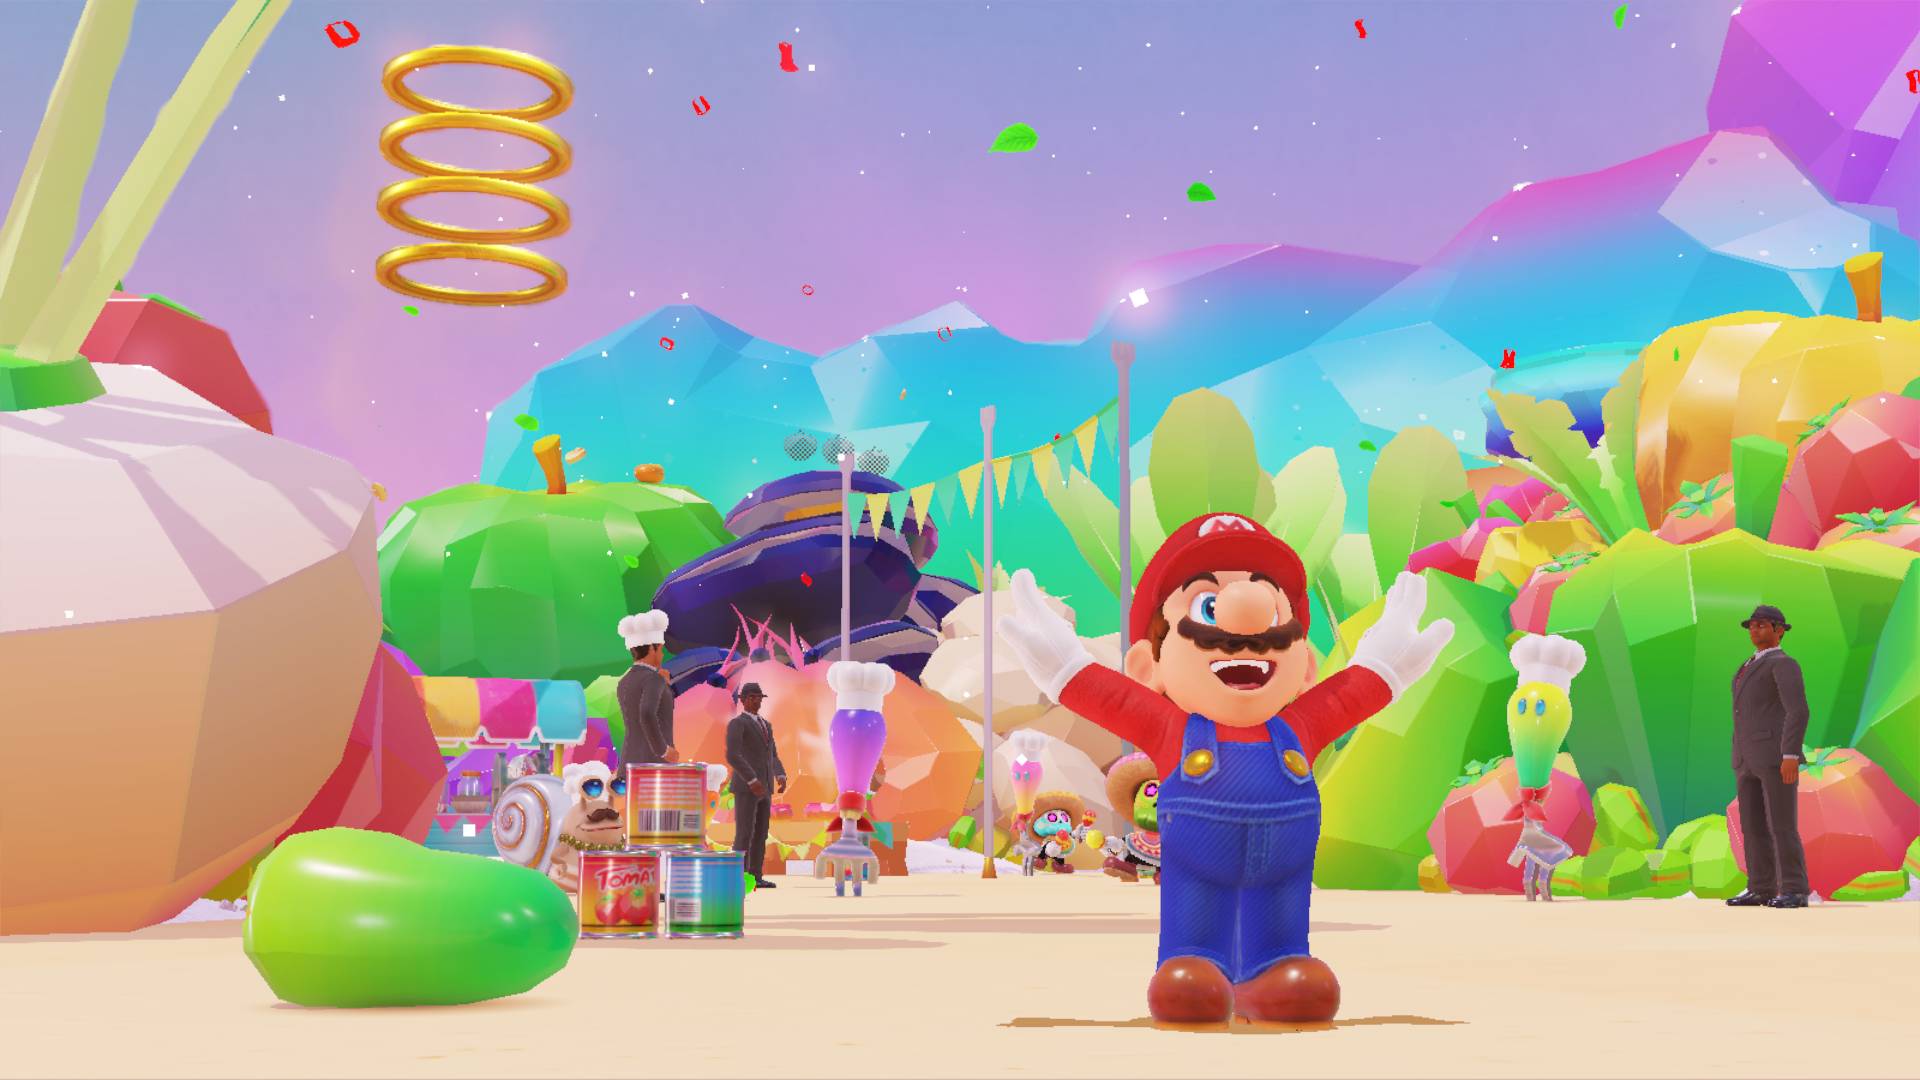 Super Mario Odyssey 2 release date, information, and more Pocket Tactics